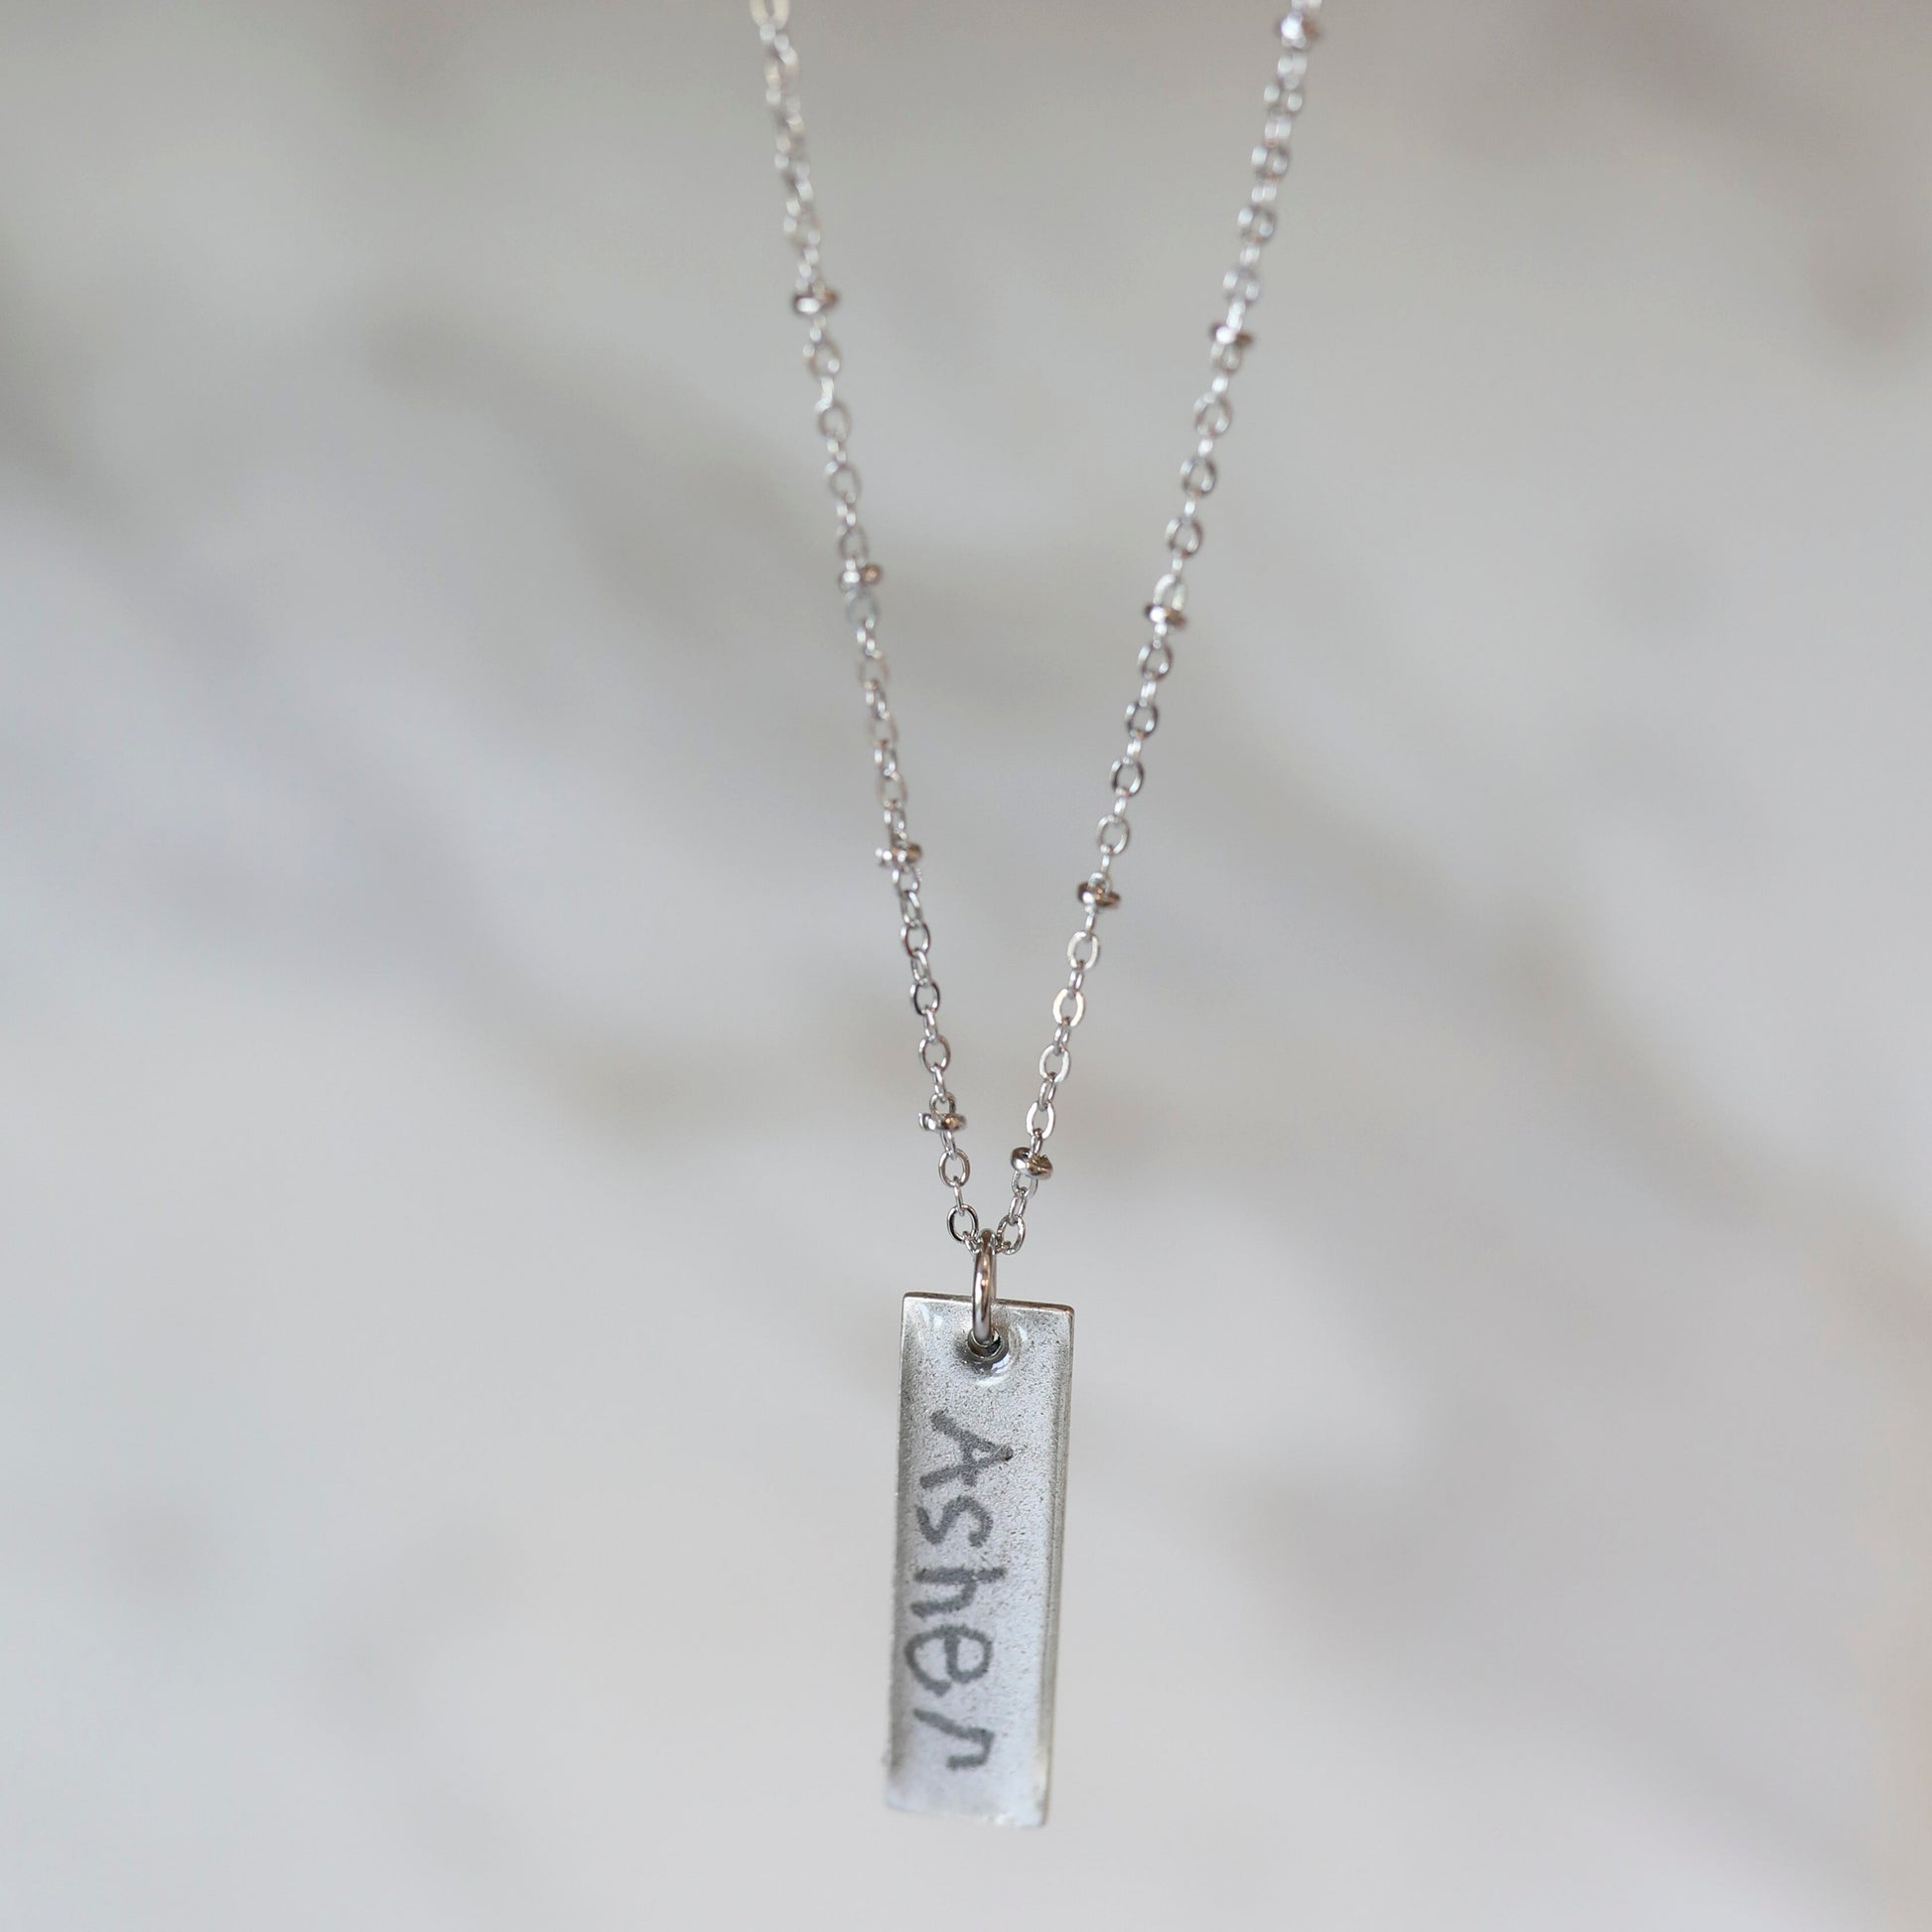 Vertical Bar Handwriting Necklace available in Antique Silver